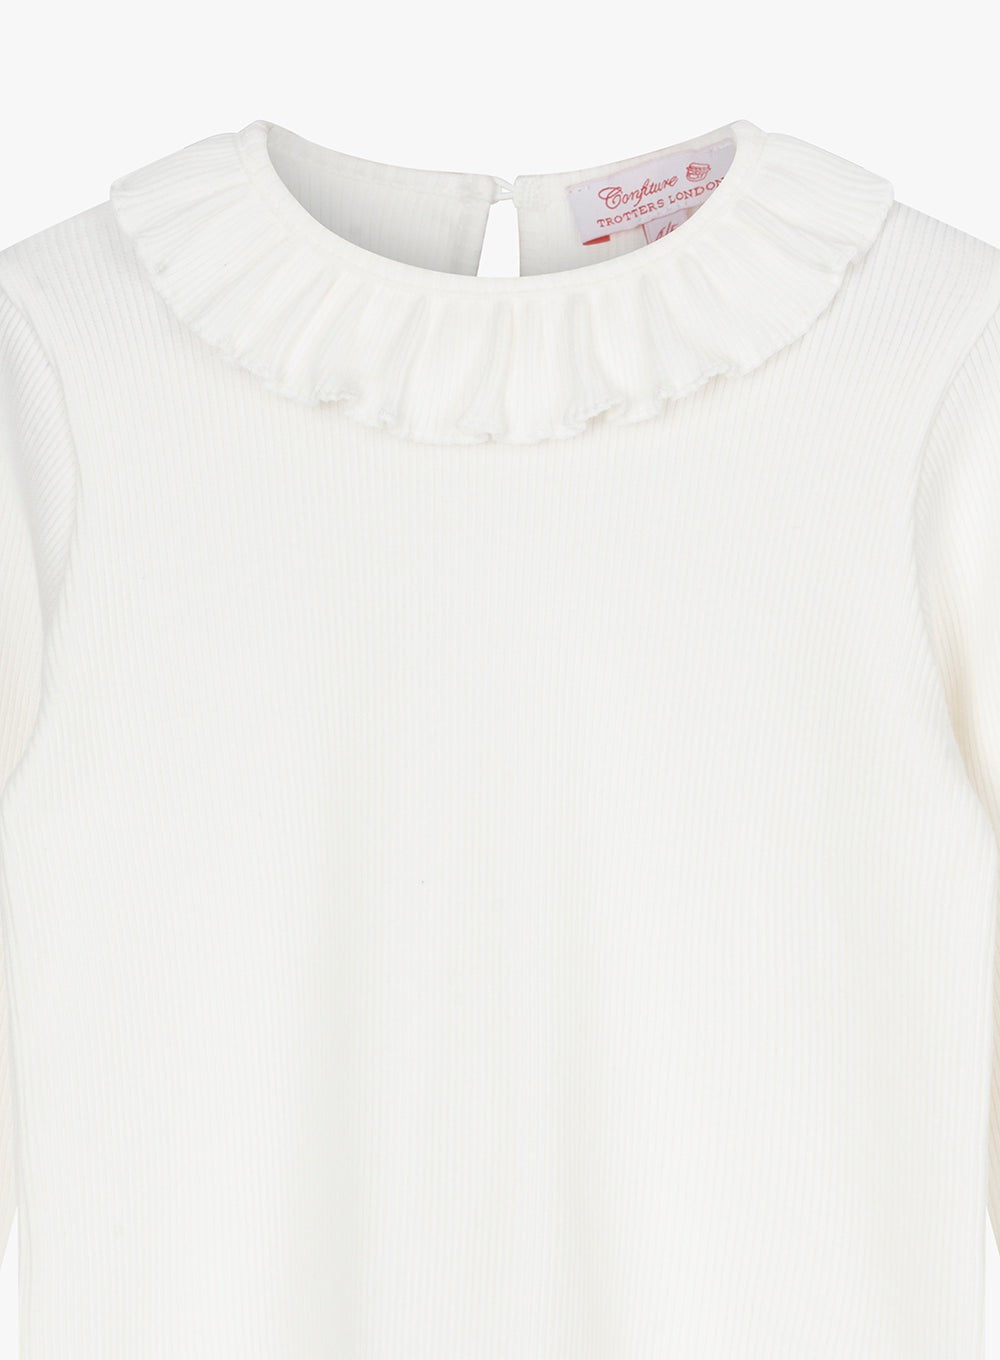 Confiture Top Grace Willow Top in Winter White